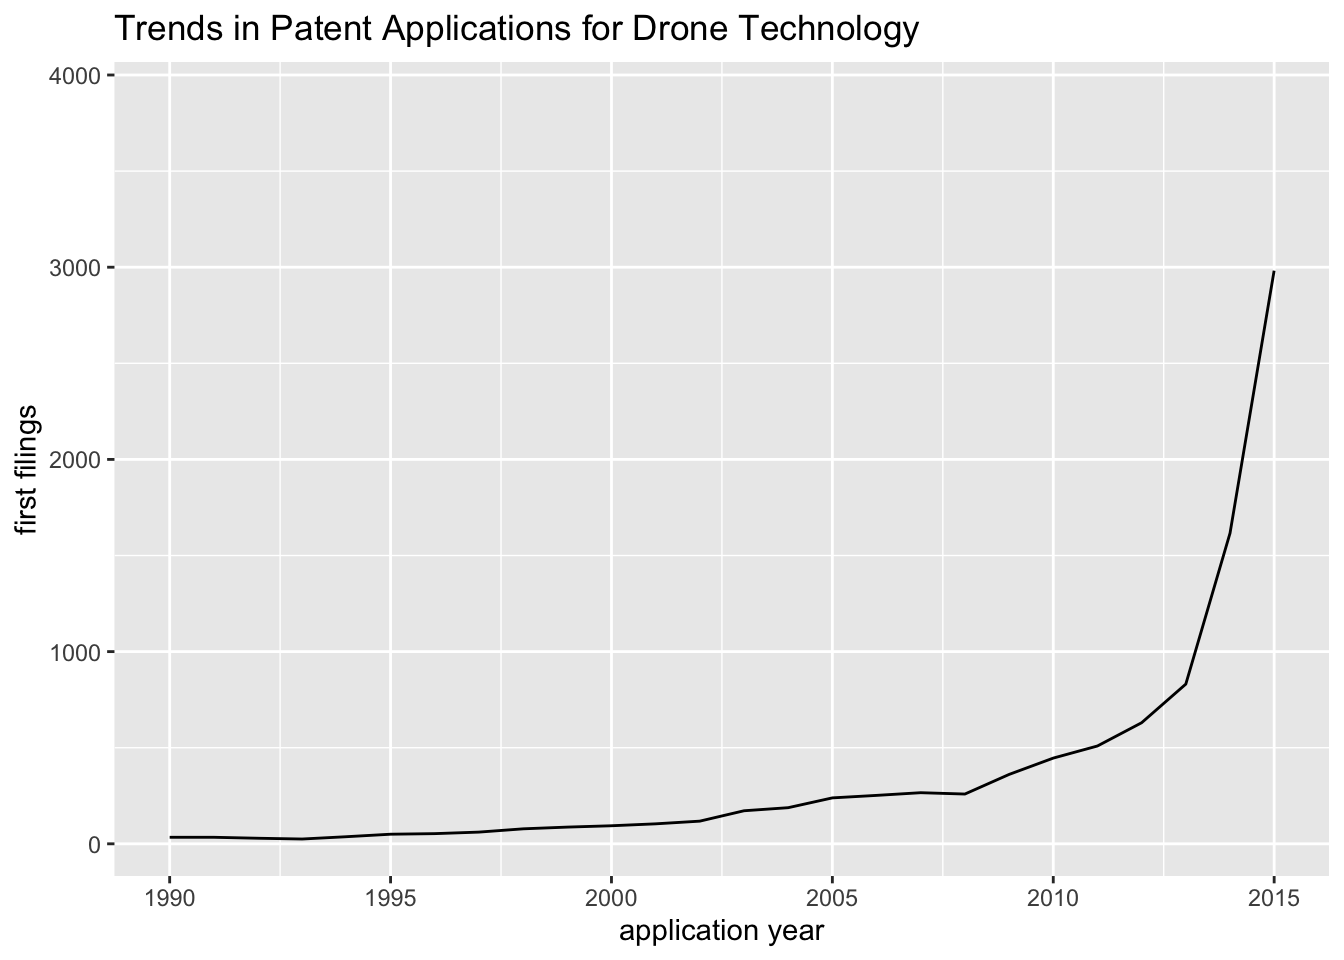 Graph of Trends in Applications by Application Year